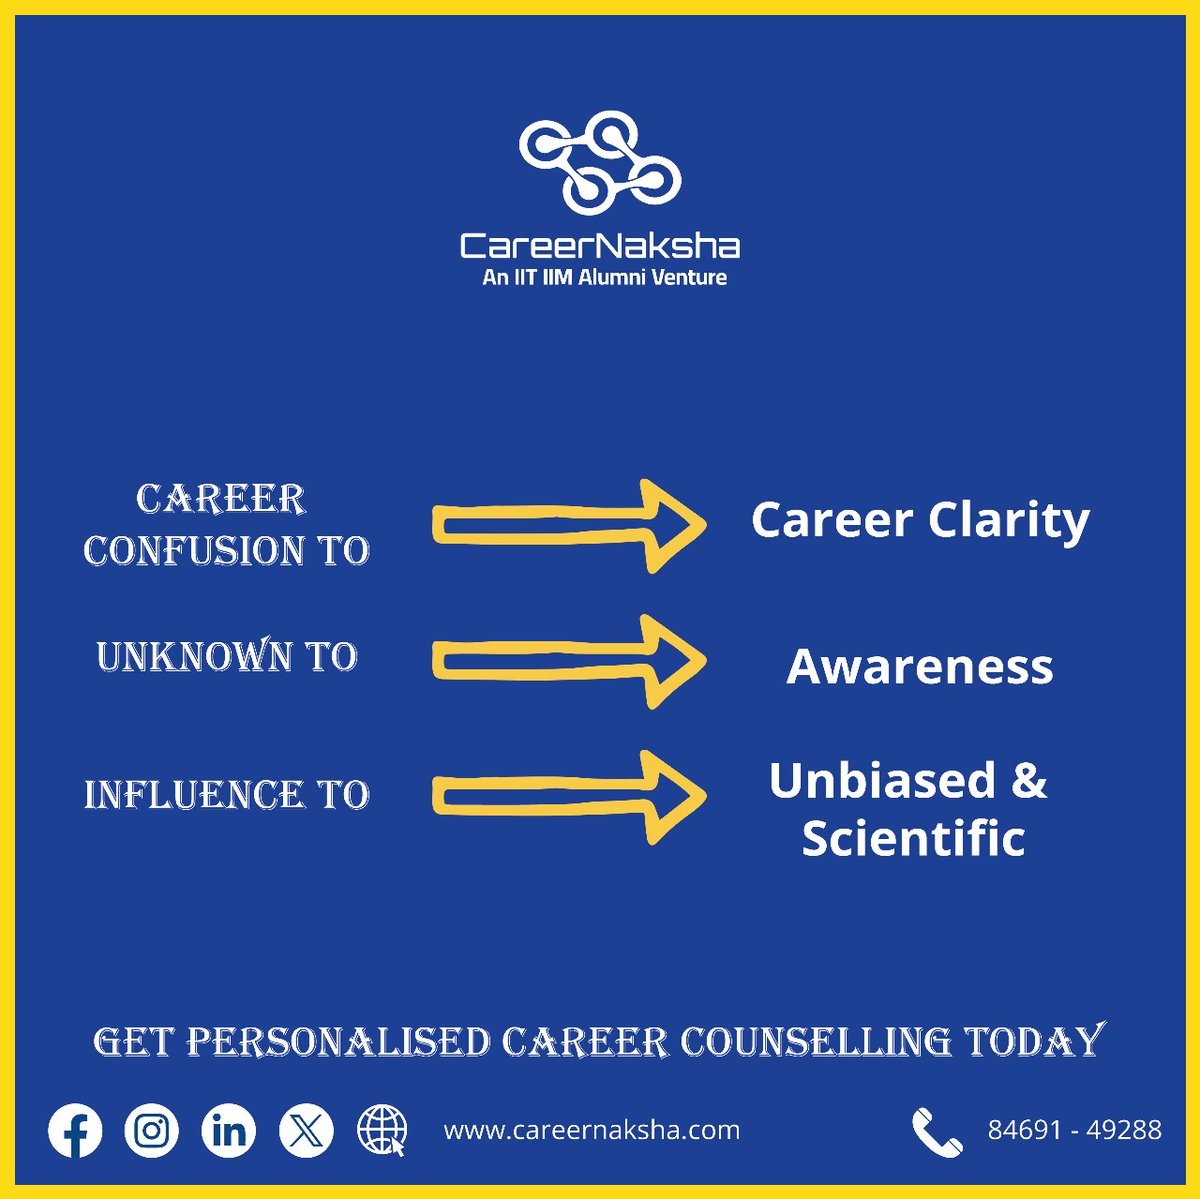 Don't let indecision hold you back. Trust CareerNaksha to illuminate the path to your dream career. #DreamCareer #CareerPath #careernaksha